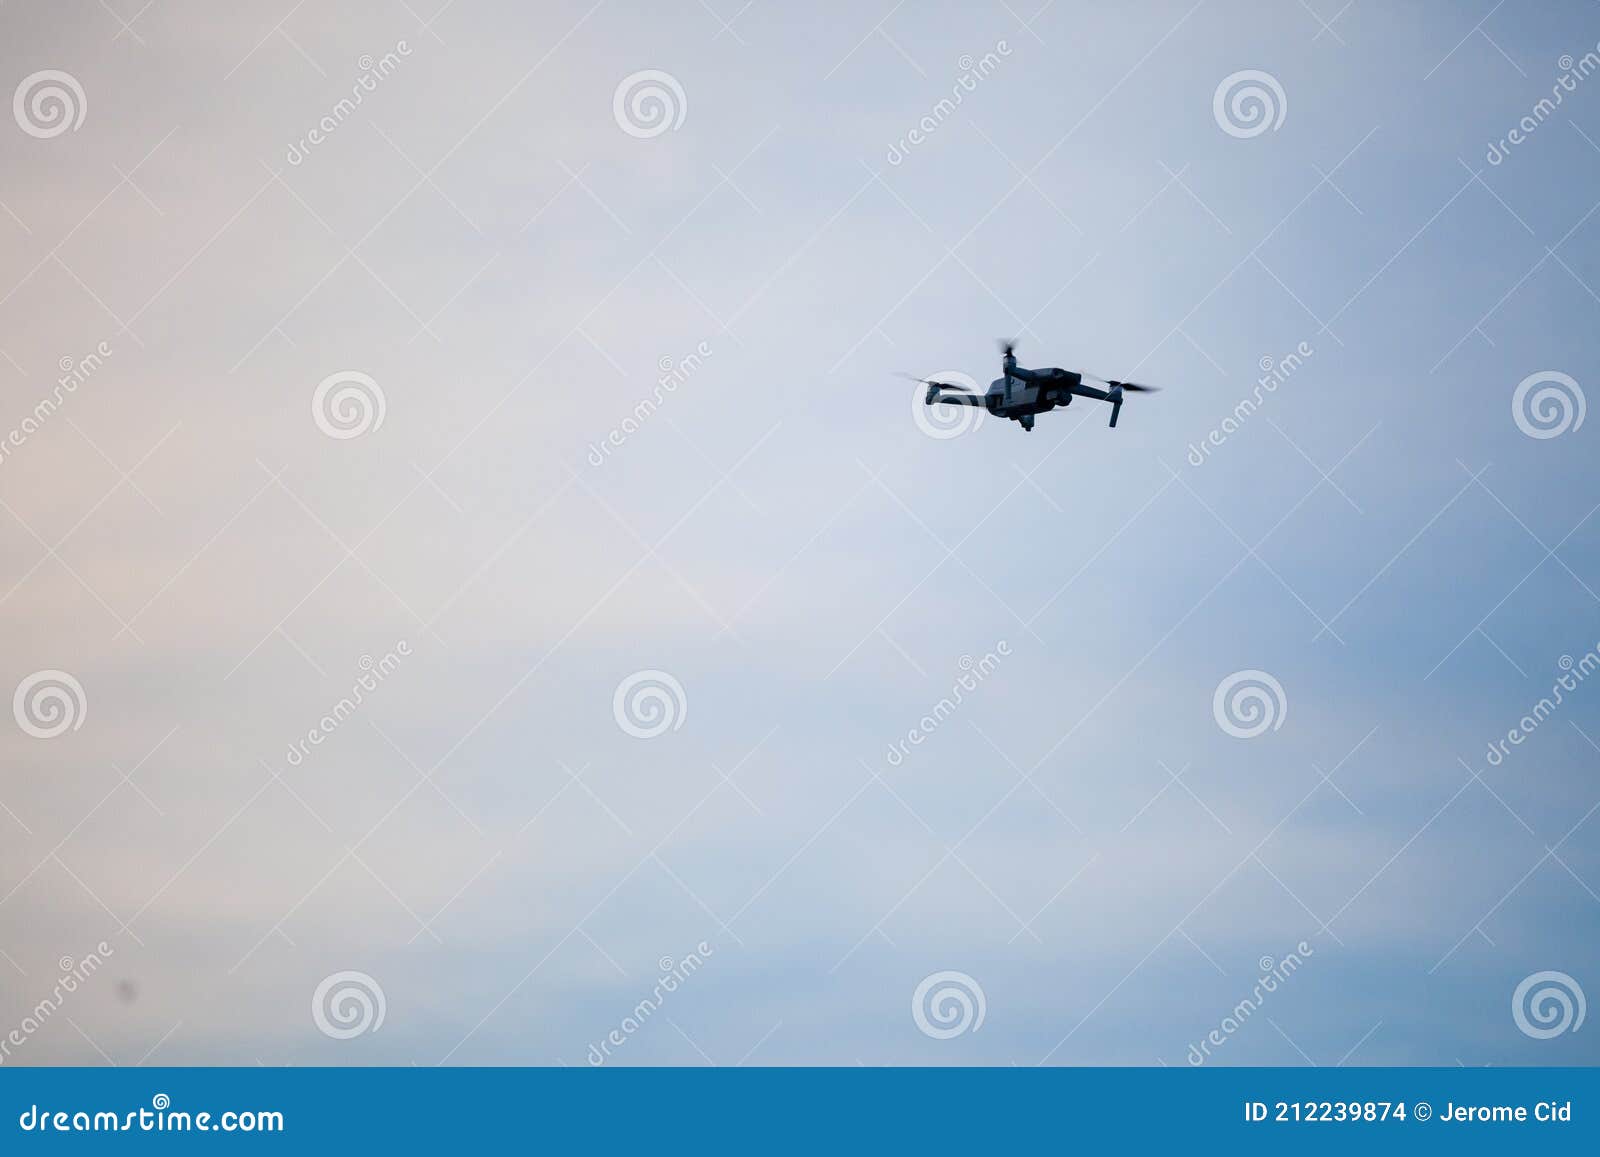 small unregistered consumer drone flying. these kind of small quadcoper drones don`t need license to be operated